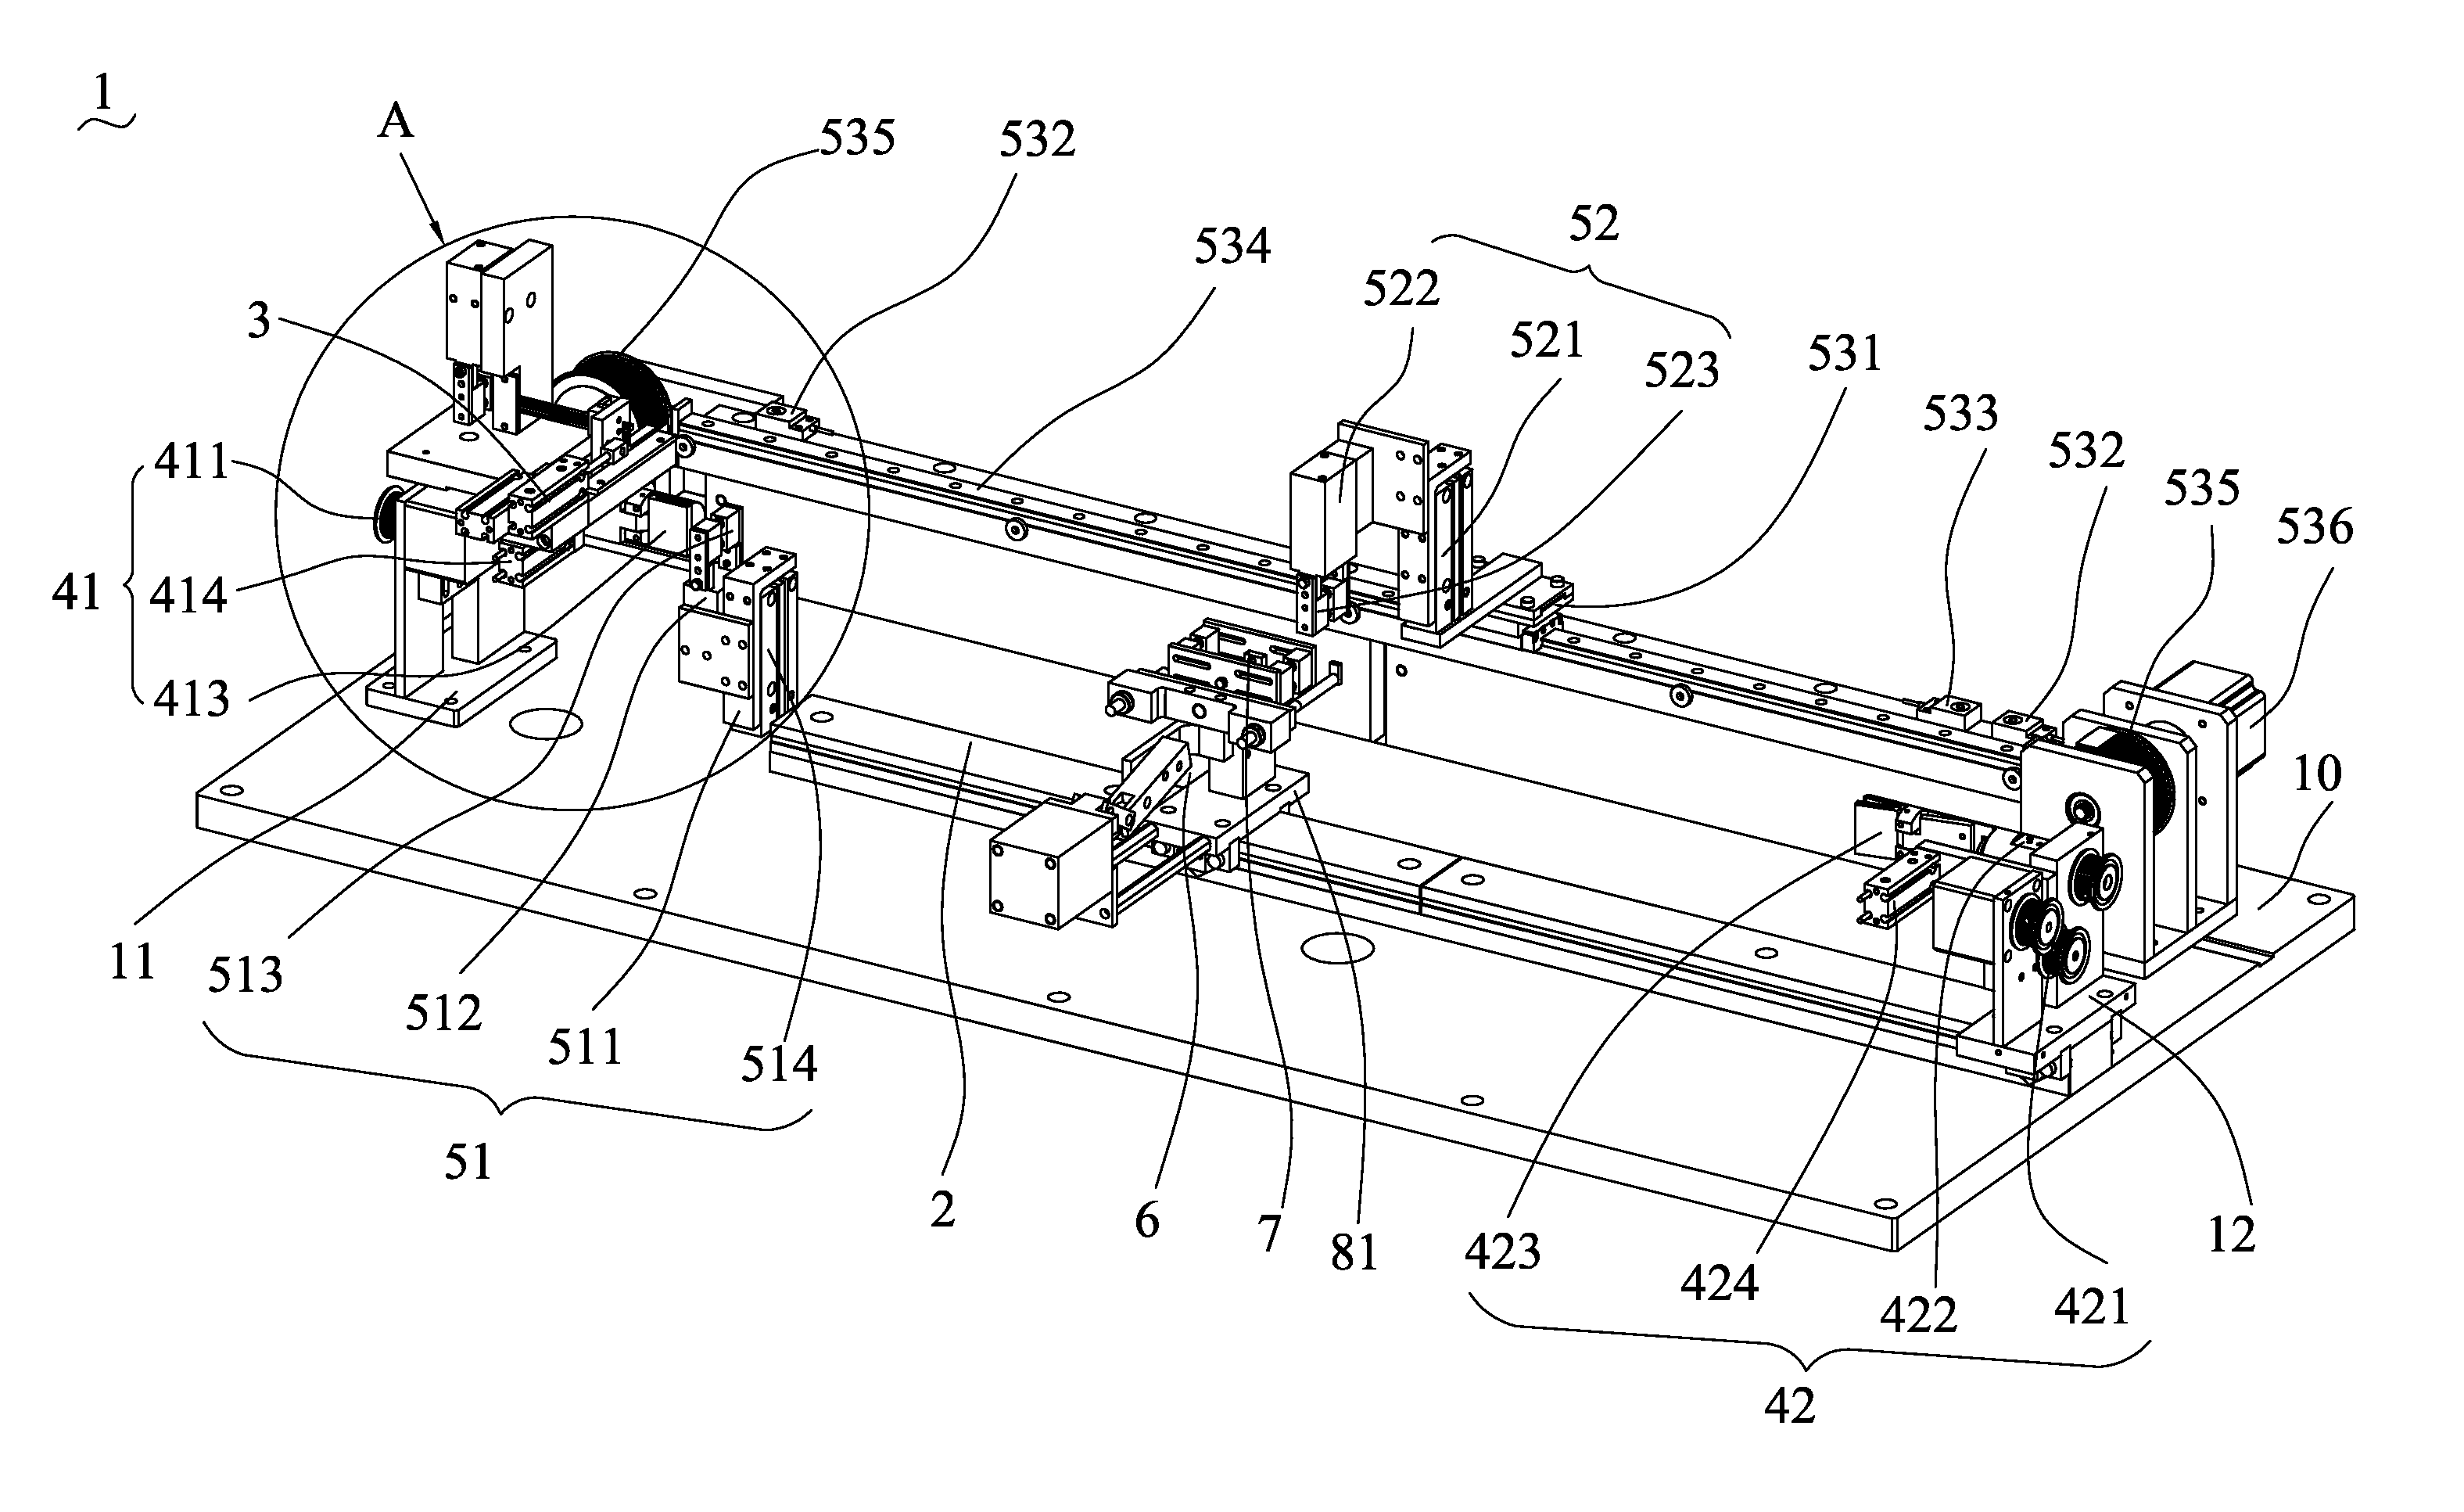 Automatic wire cutting and twisting apparatus